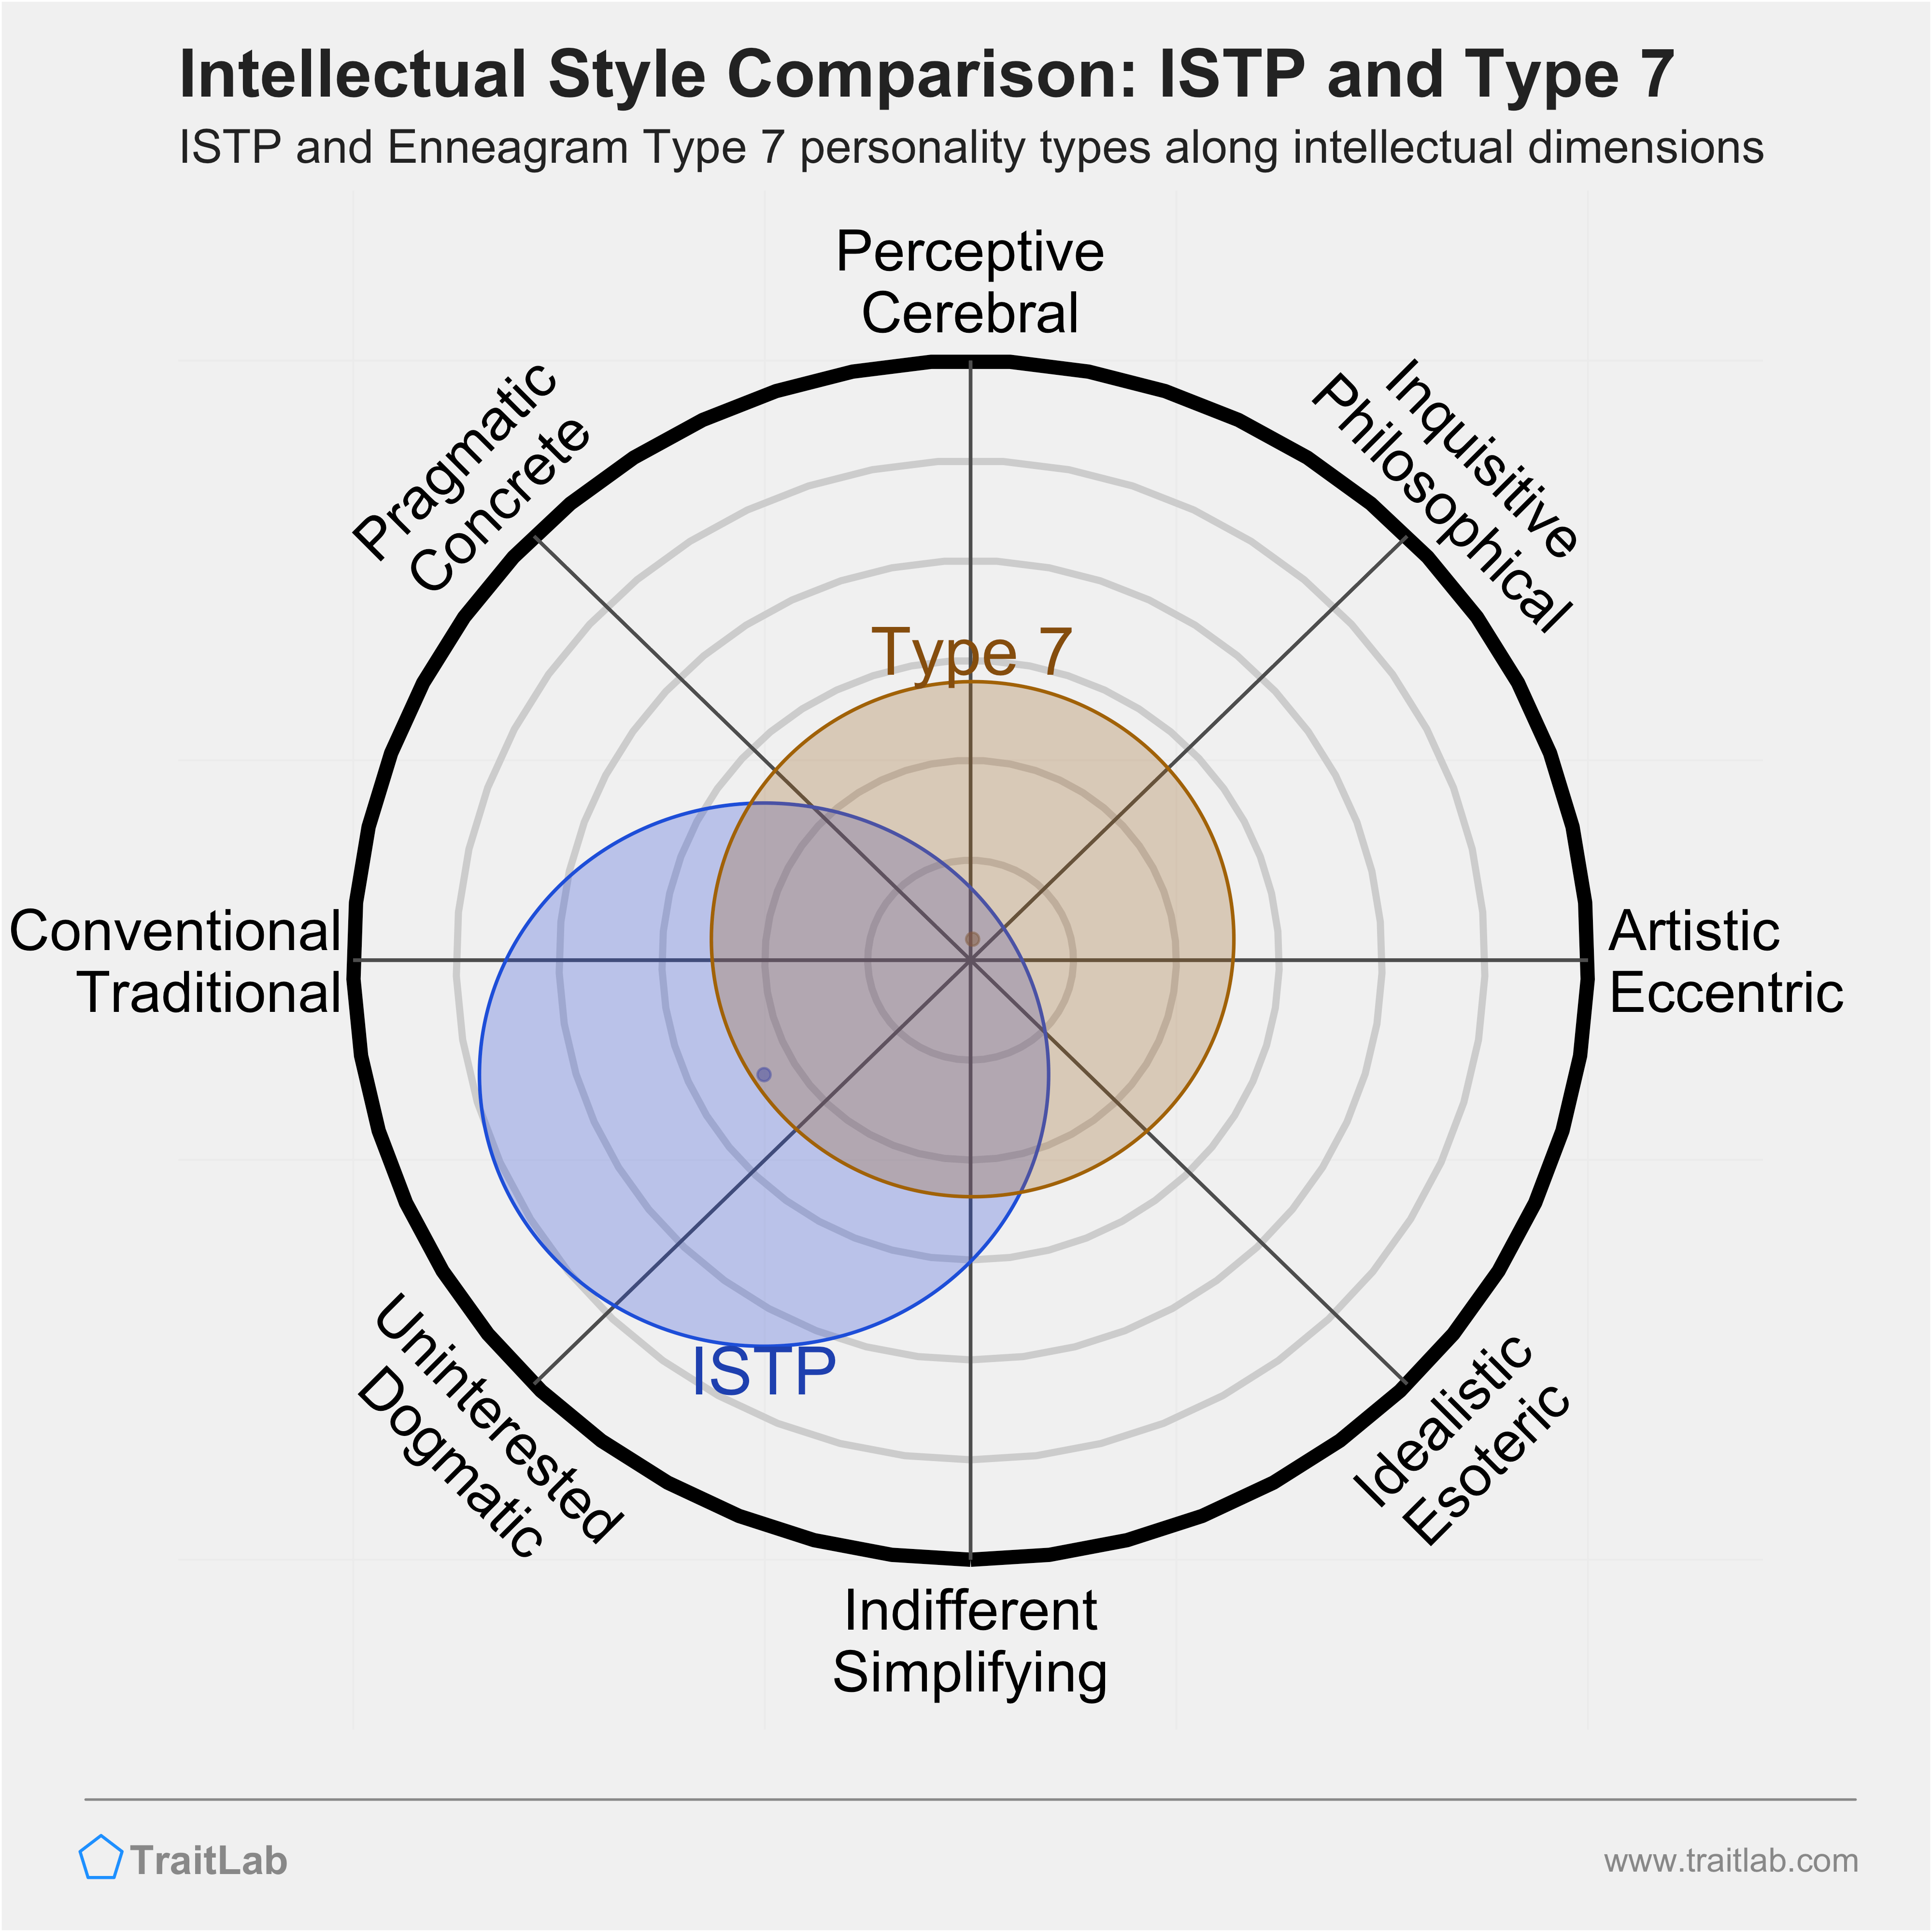 ISTP and Type 7 comparison across intellectual dimensions